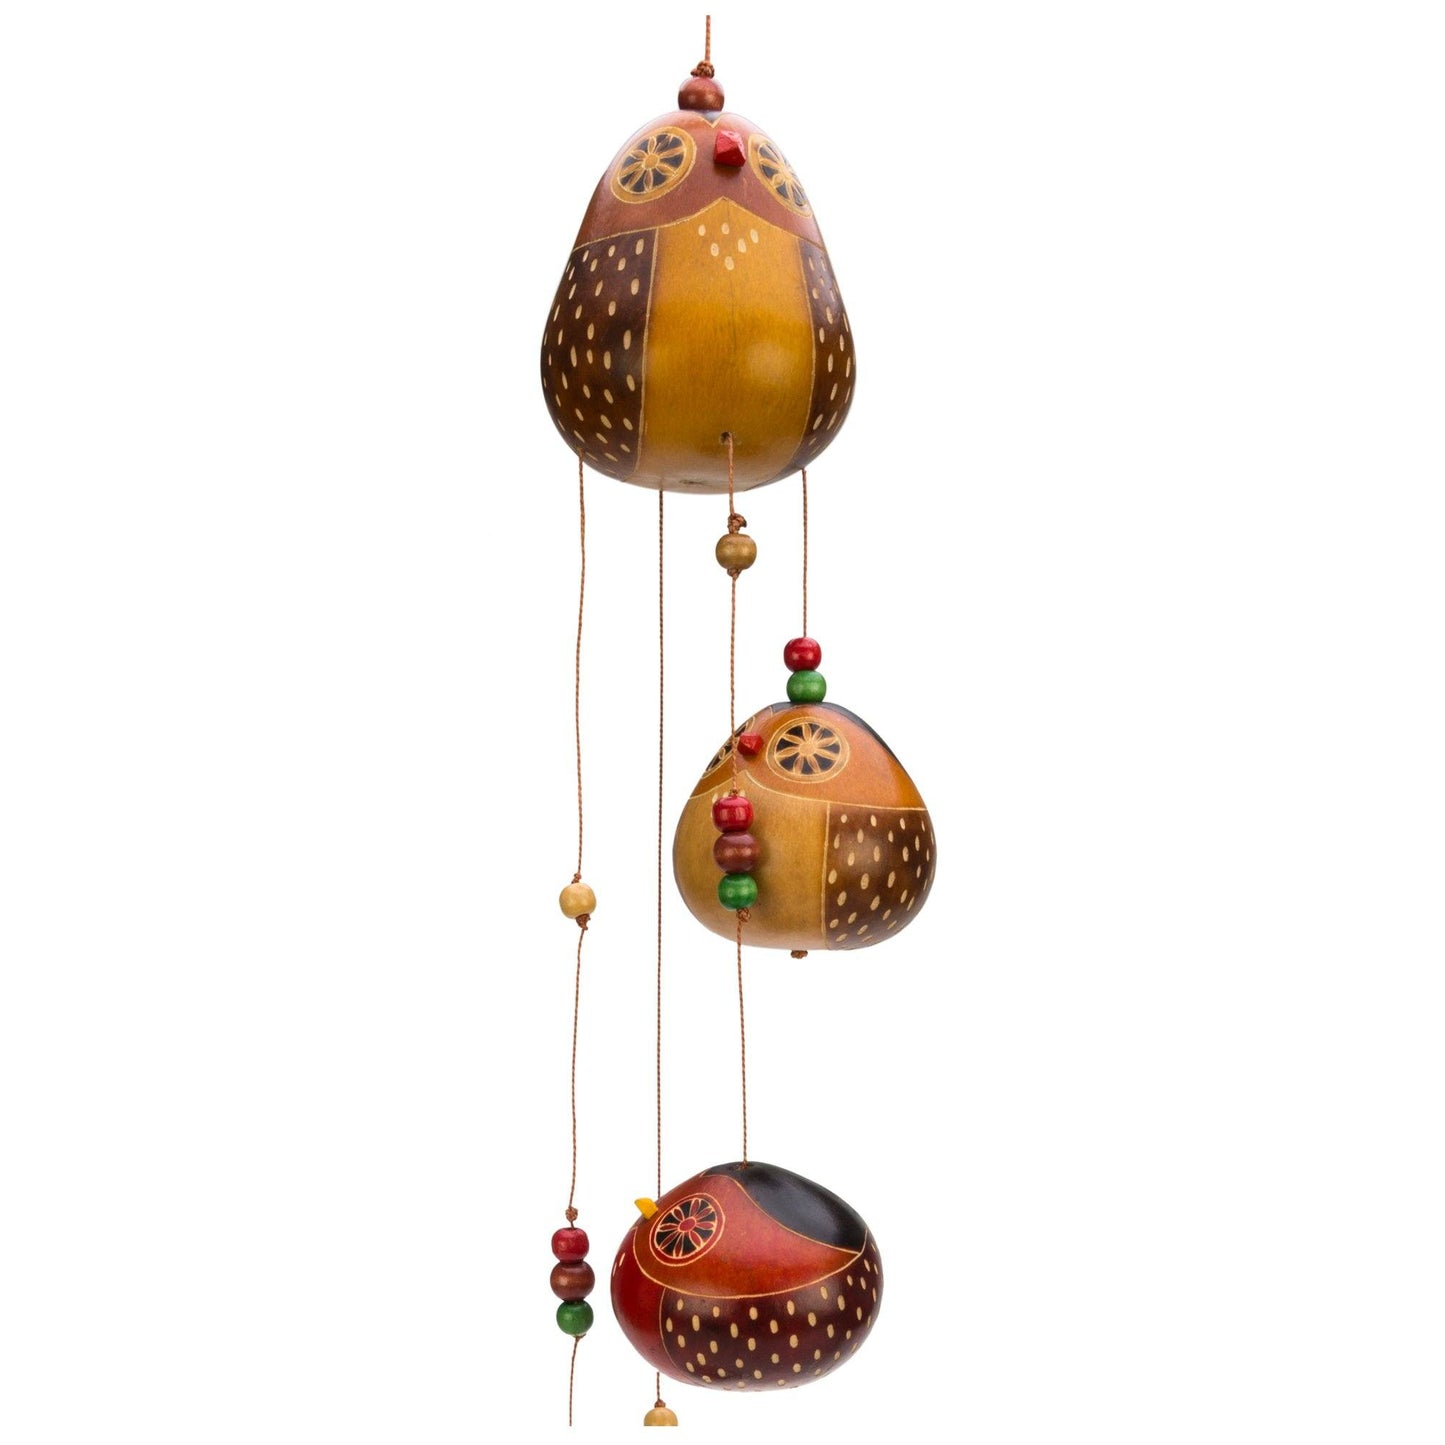 Dancing Owls Gourd Wind Chime